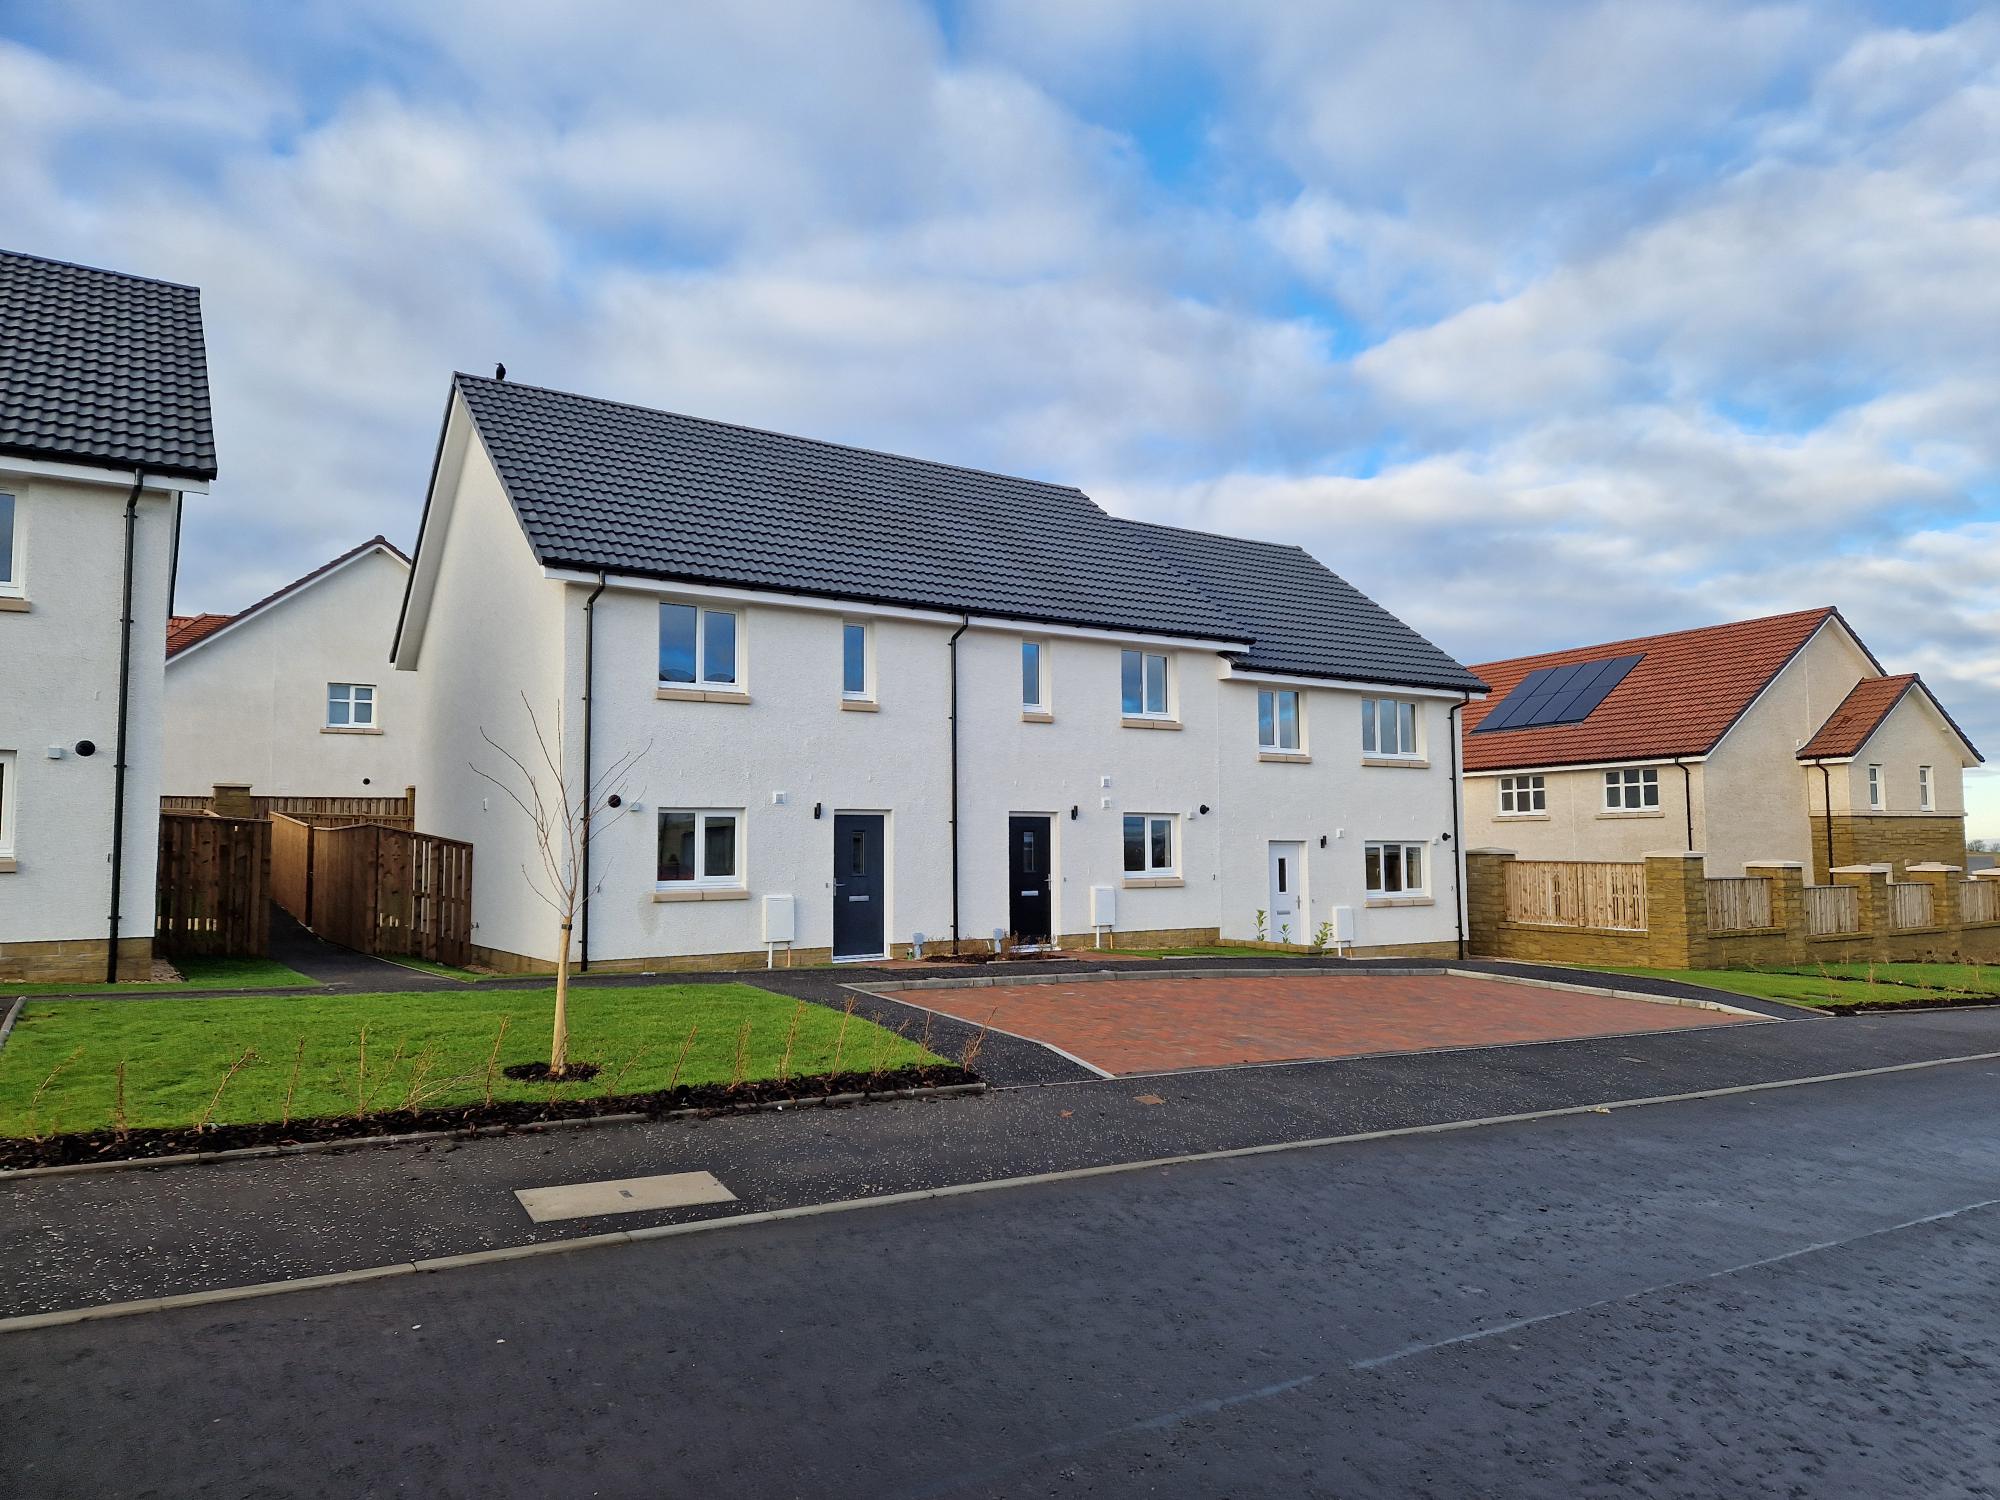 WSHA welcomes first tenants to new homes in Doonfoot